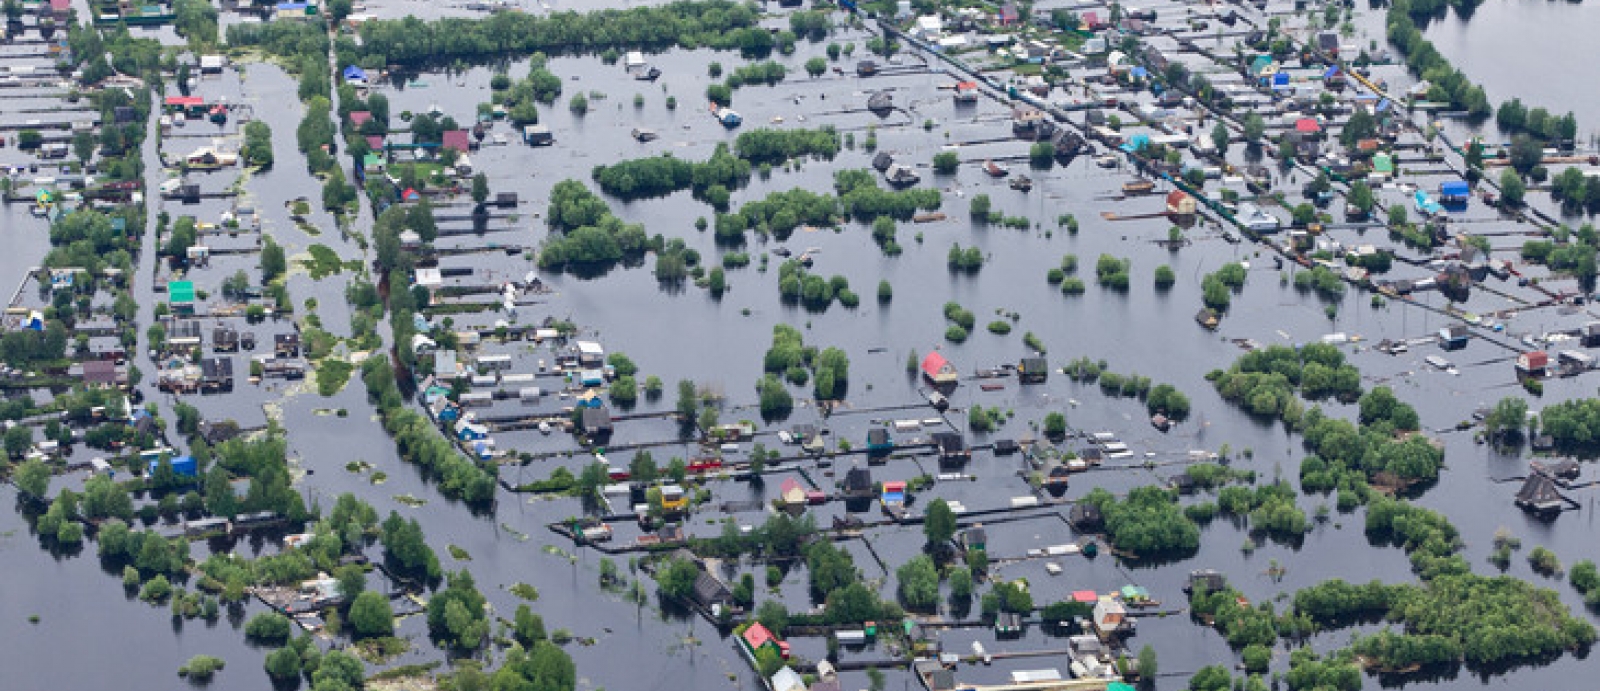 Students in the College of Information Sciences and Technology have developed a computer model that could help classify images of disaster scenes, such as a flood, to aid emergency response. Image: Vladimir Melnikov - Adobe Stock